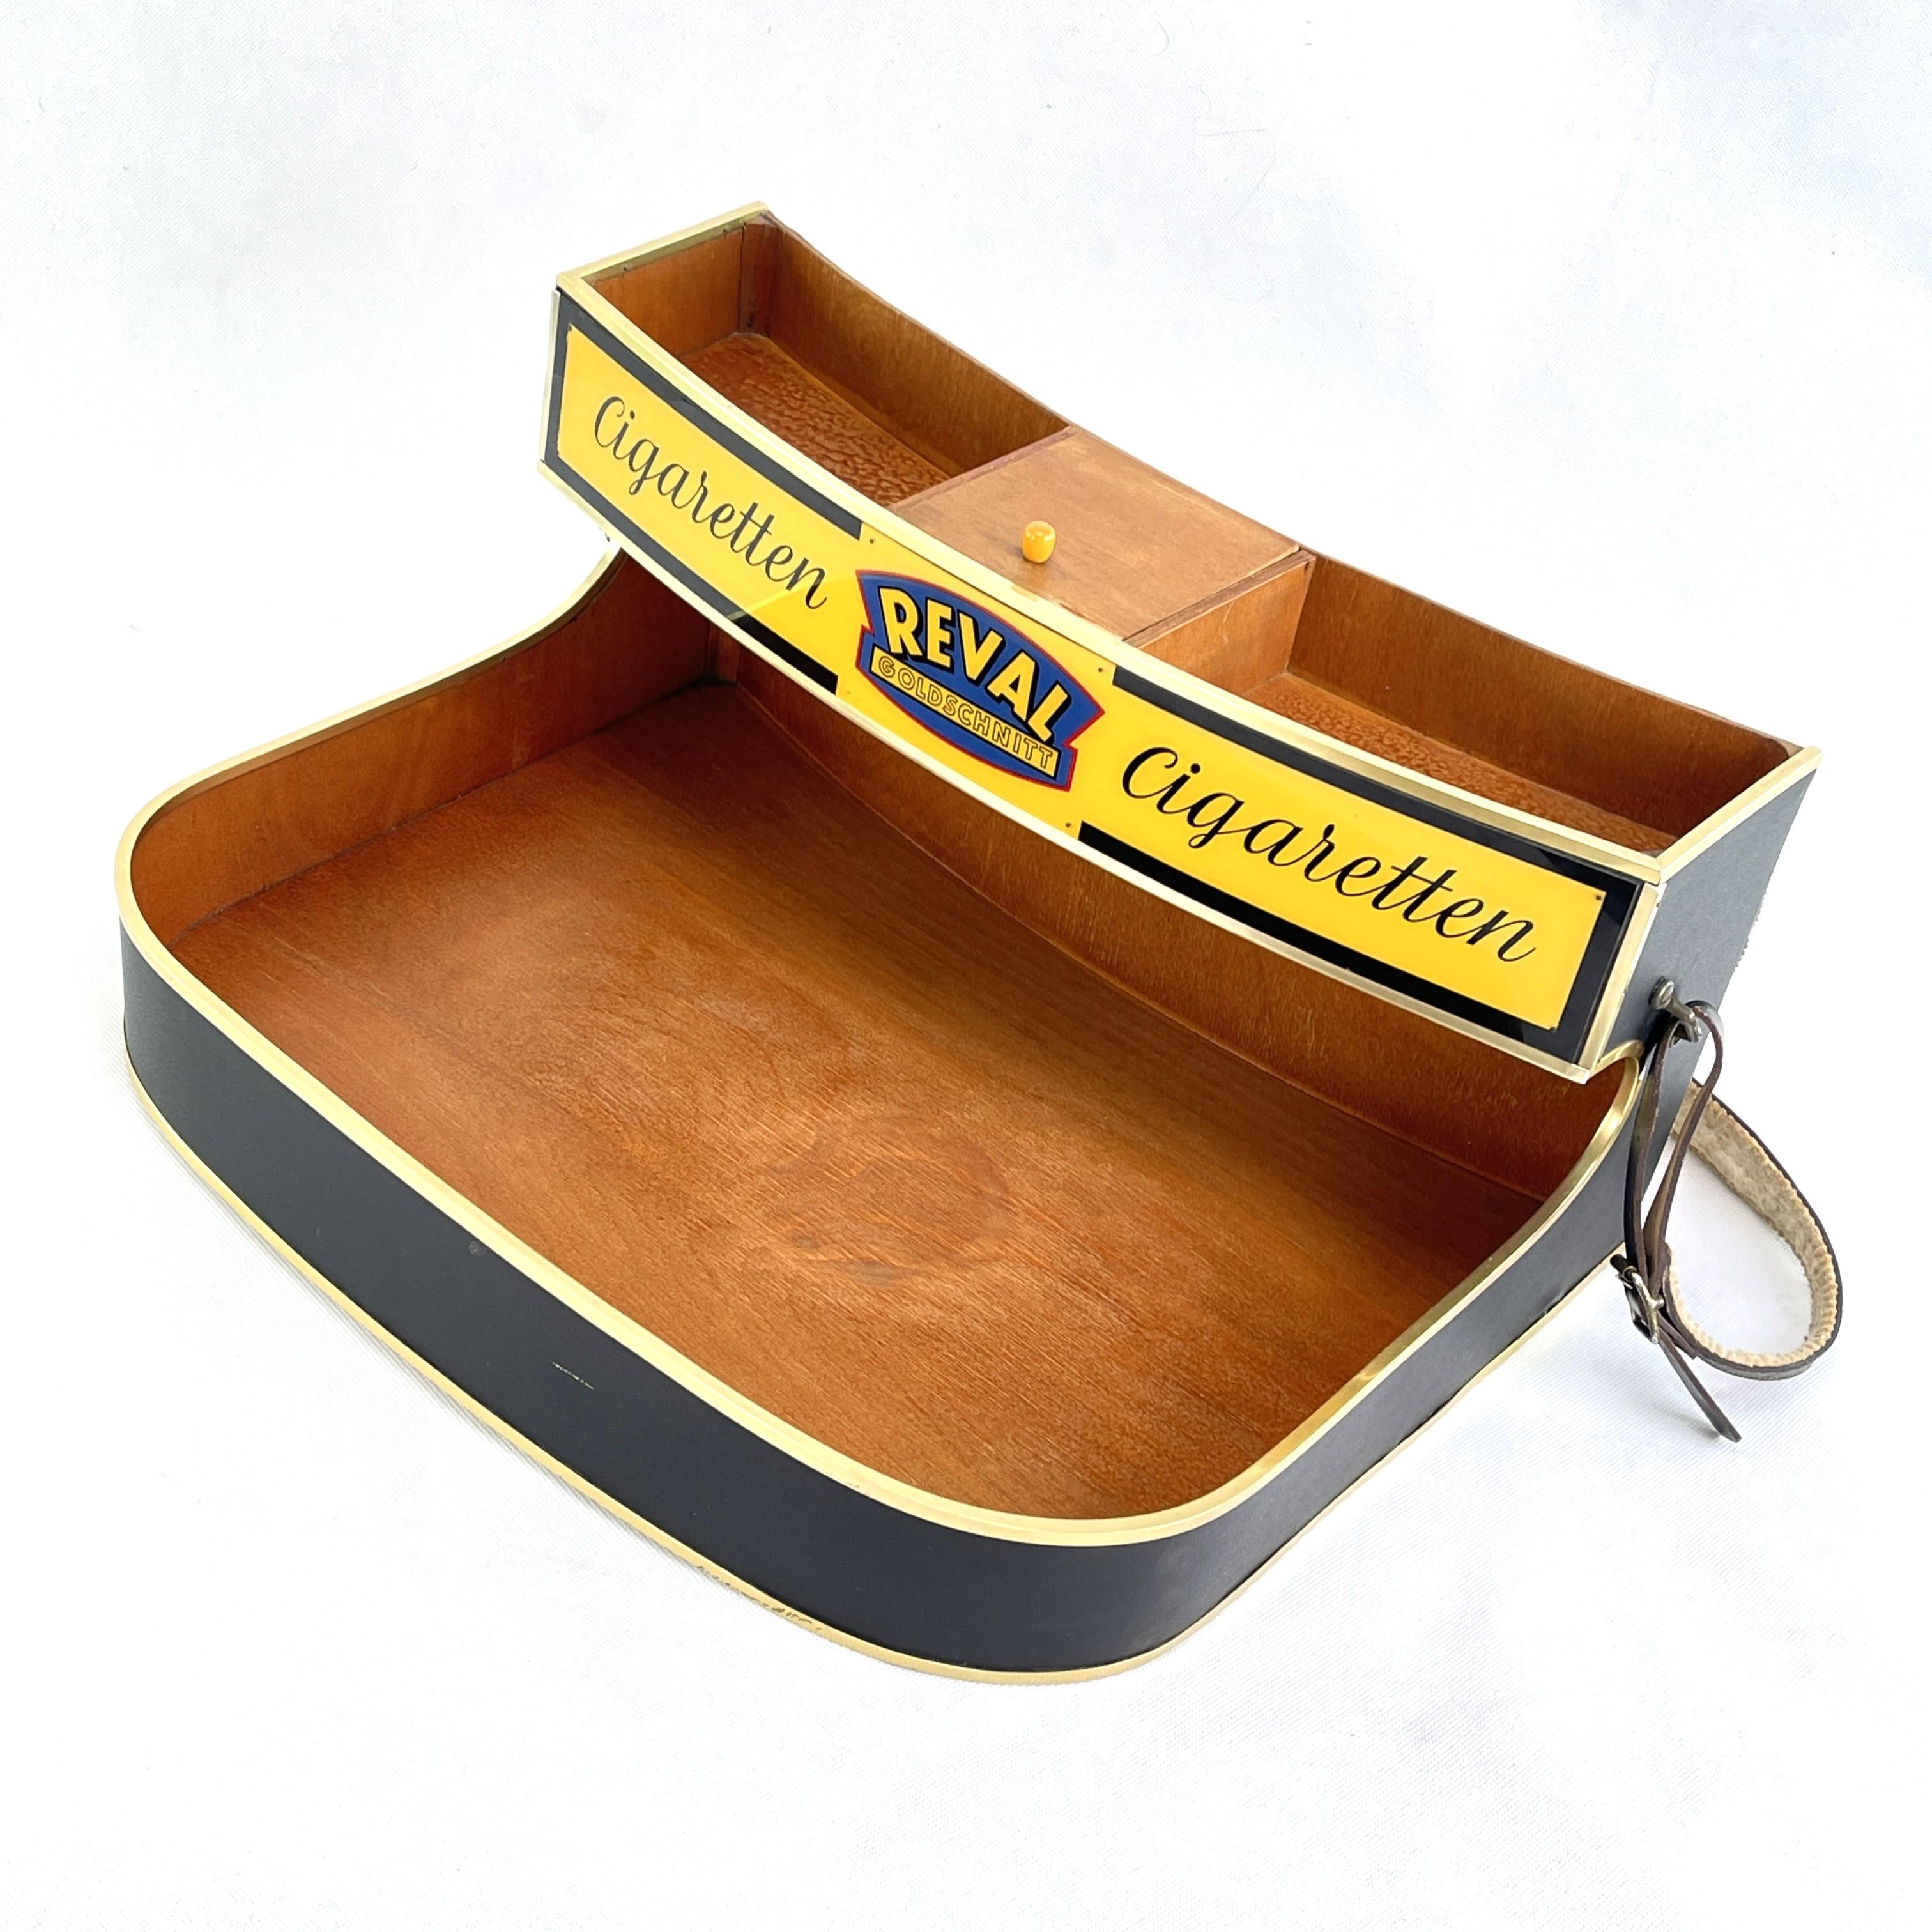 Old Reval Cigarettes Vendor's Tray - 1970s

The vintage vendor's tray from the renowned company REVAL is a real treasure for lovers of retro accessories and collectors of historical promotional items. This unique vendor's tray takes you on a